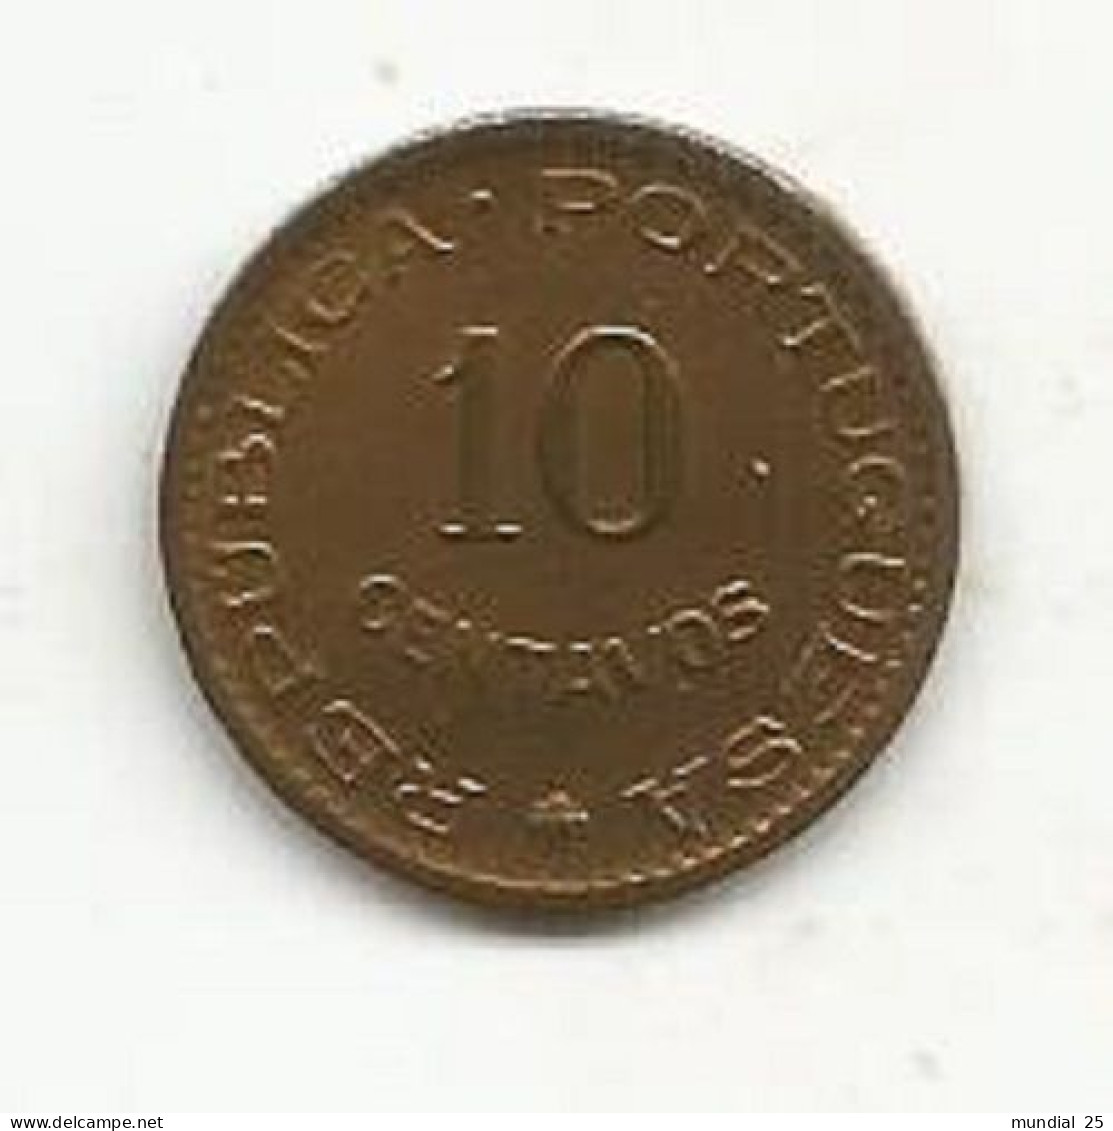 INDIA PORTUGUESE 10 CENTAVOS 1958 (WITH VARNISH) - Indien